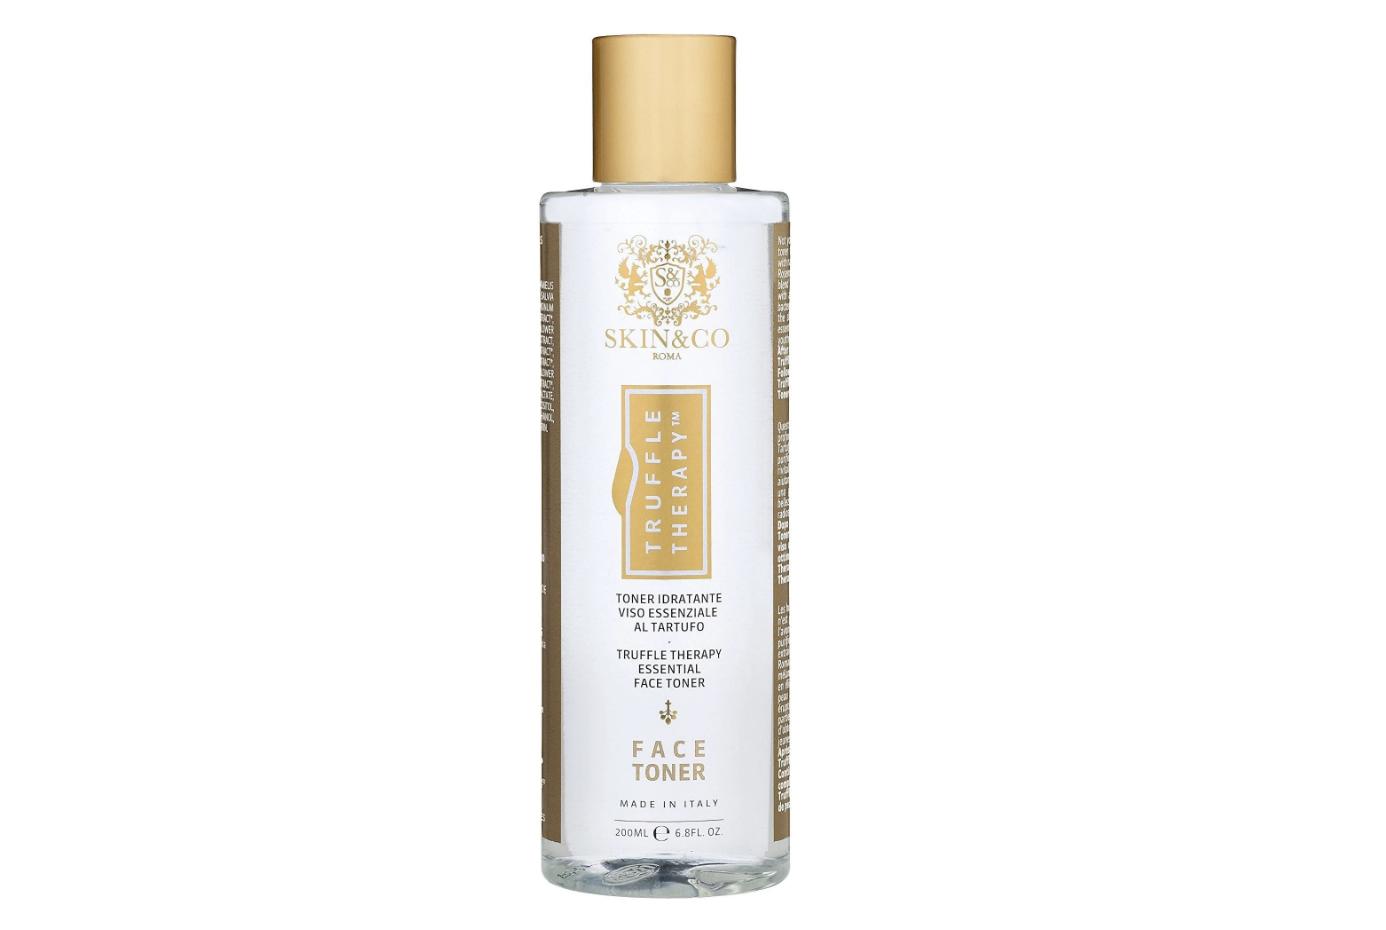 Skin & Co Truffle Therapy Essential Face Toner 200ml